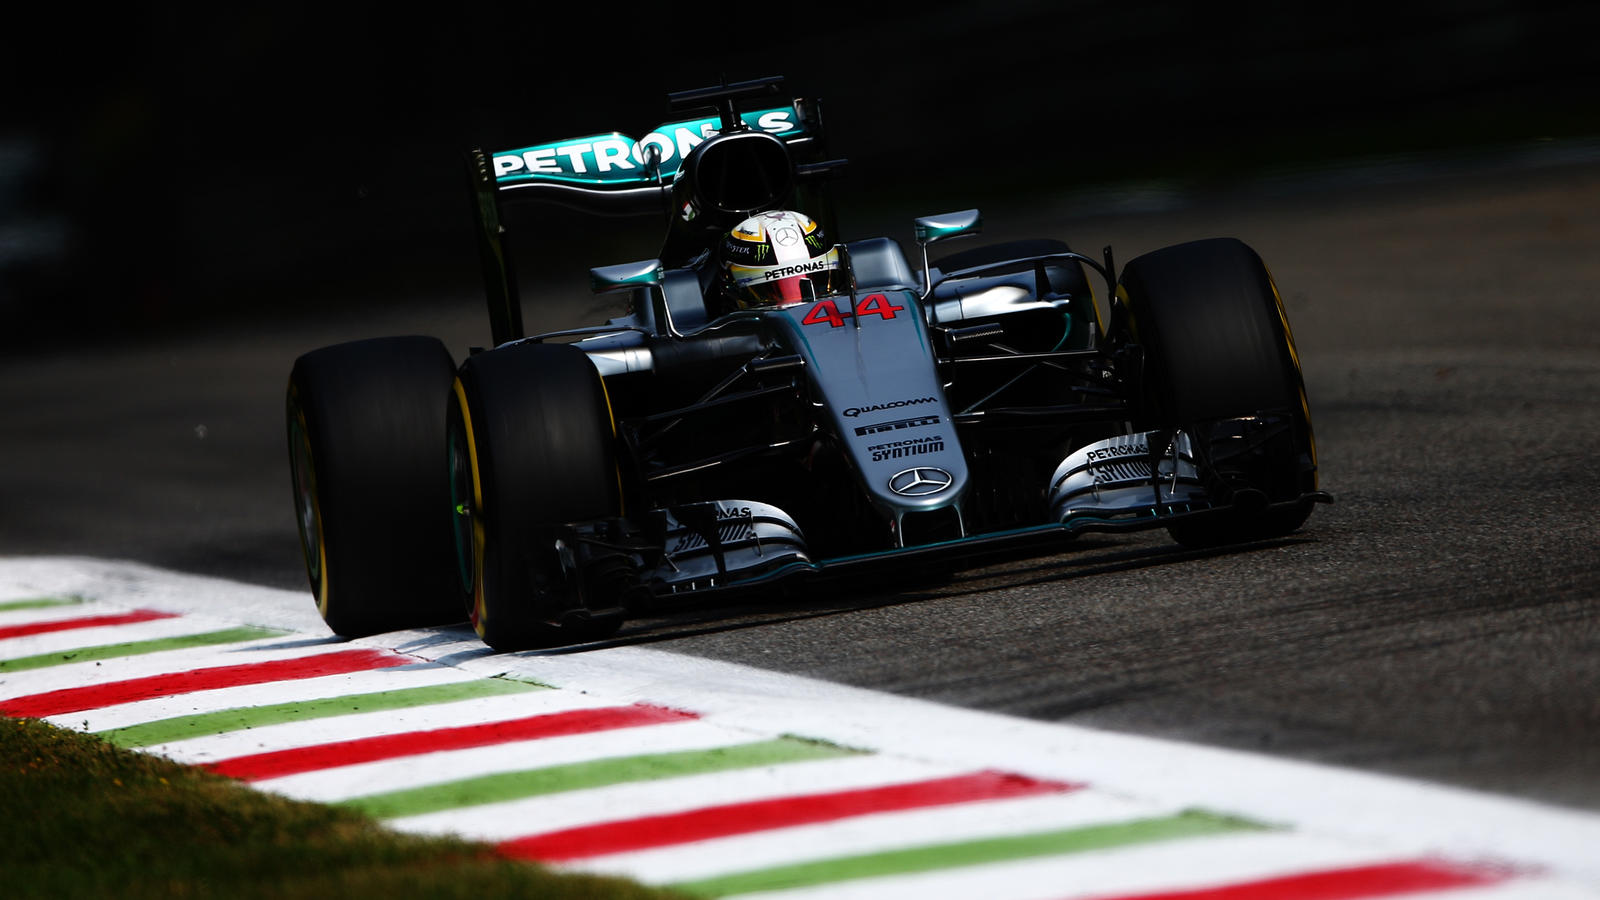 MONZA, ITALY - SEPTEMBER 02: Lewis Hamilton of Great Britain driving the (44) Mercedes AMG Petronas F1 Team Mercedes F1 WO7 Mercedes PU106C Hybrid turbo on track during practice for the Formula One Grand Prix of Italy at Autodromo di Monza on Septemb